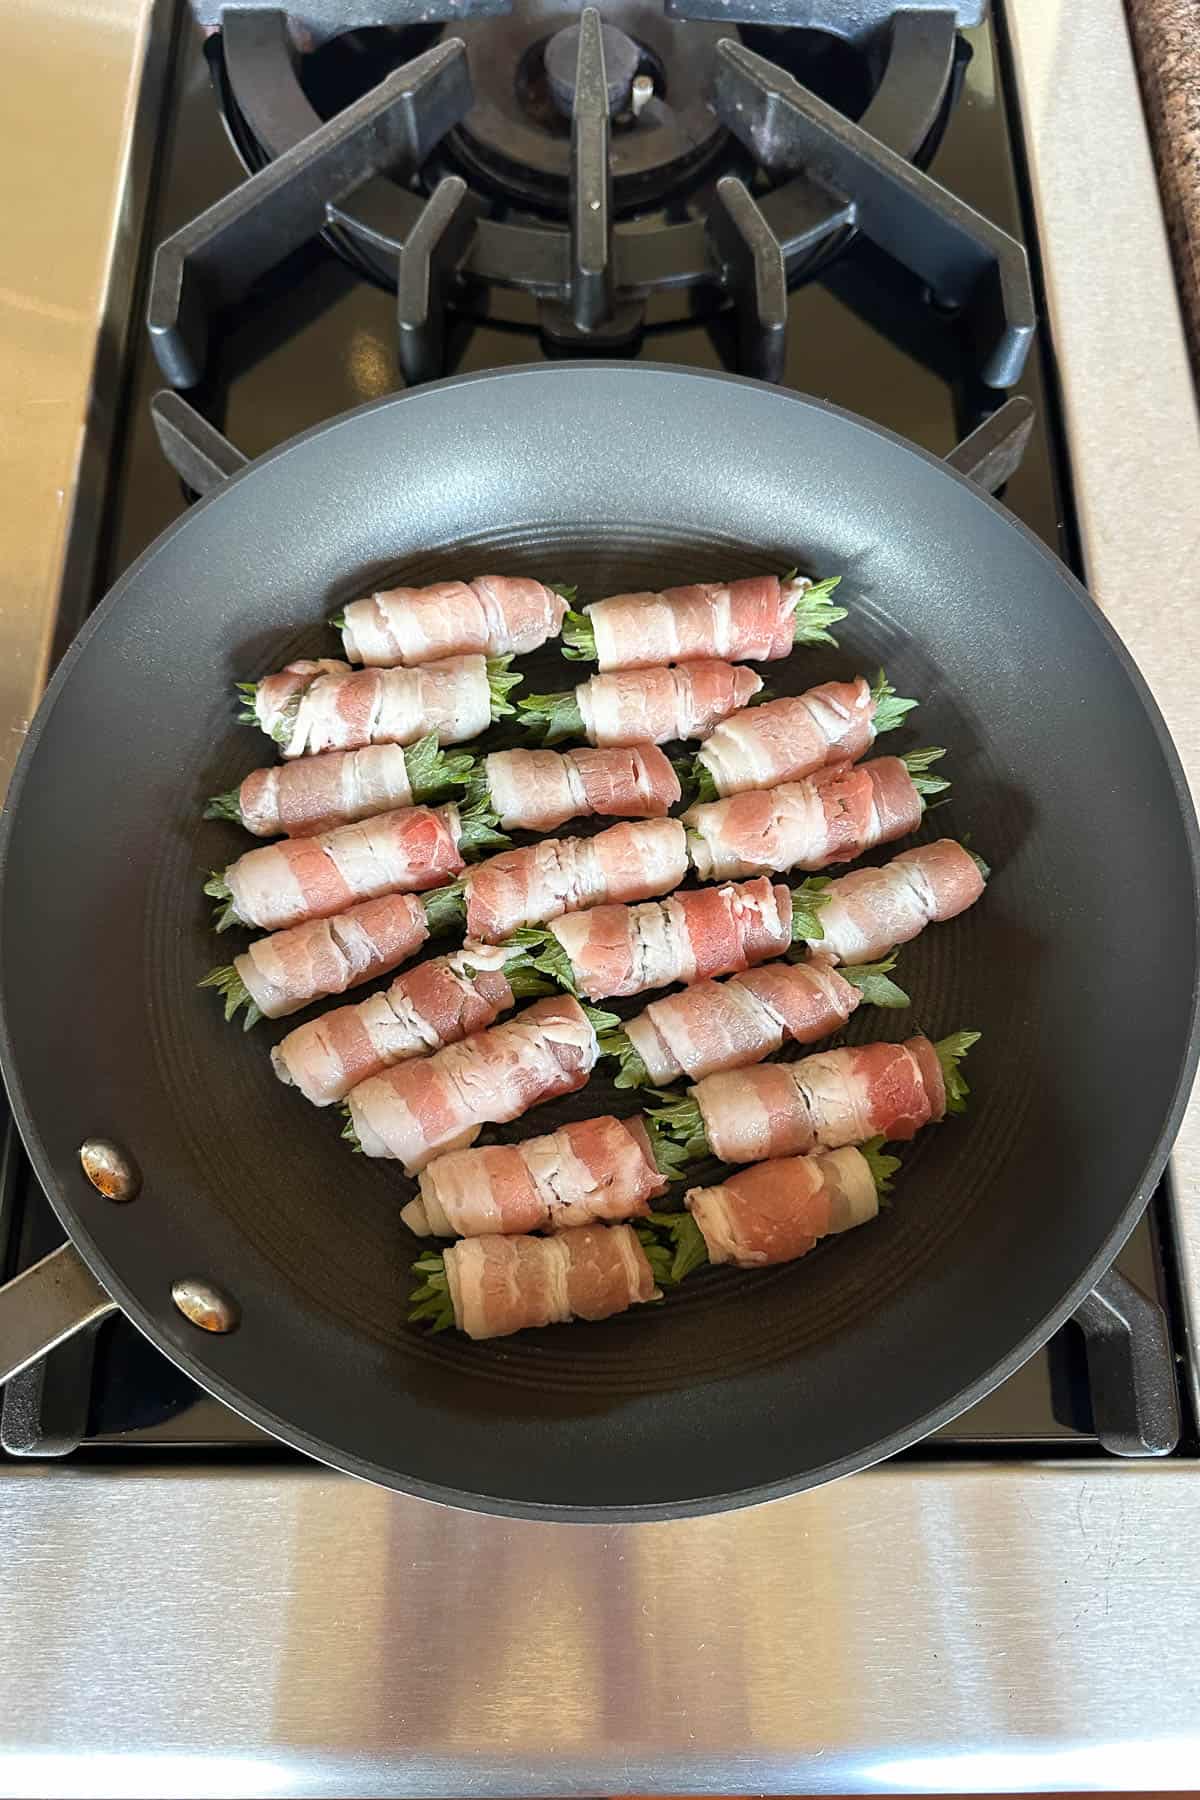 Pan frying the pork belly and shiso rolls.